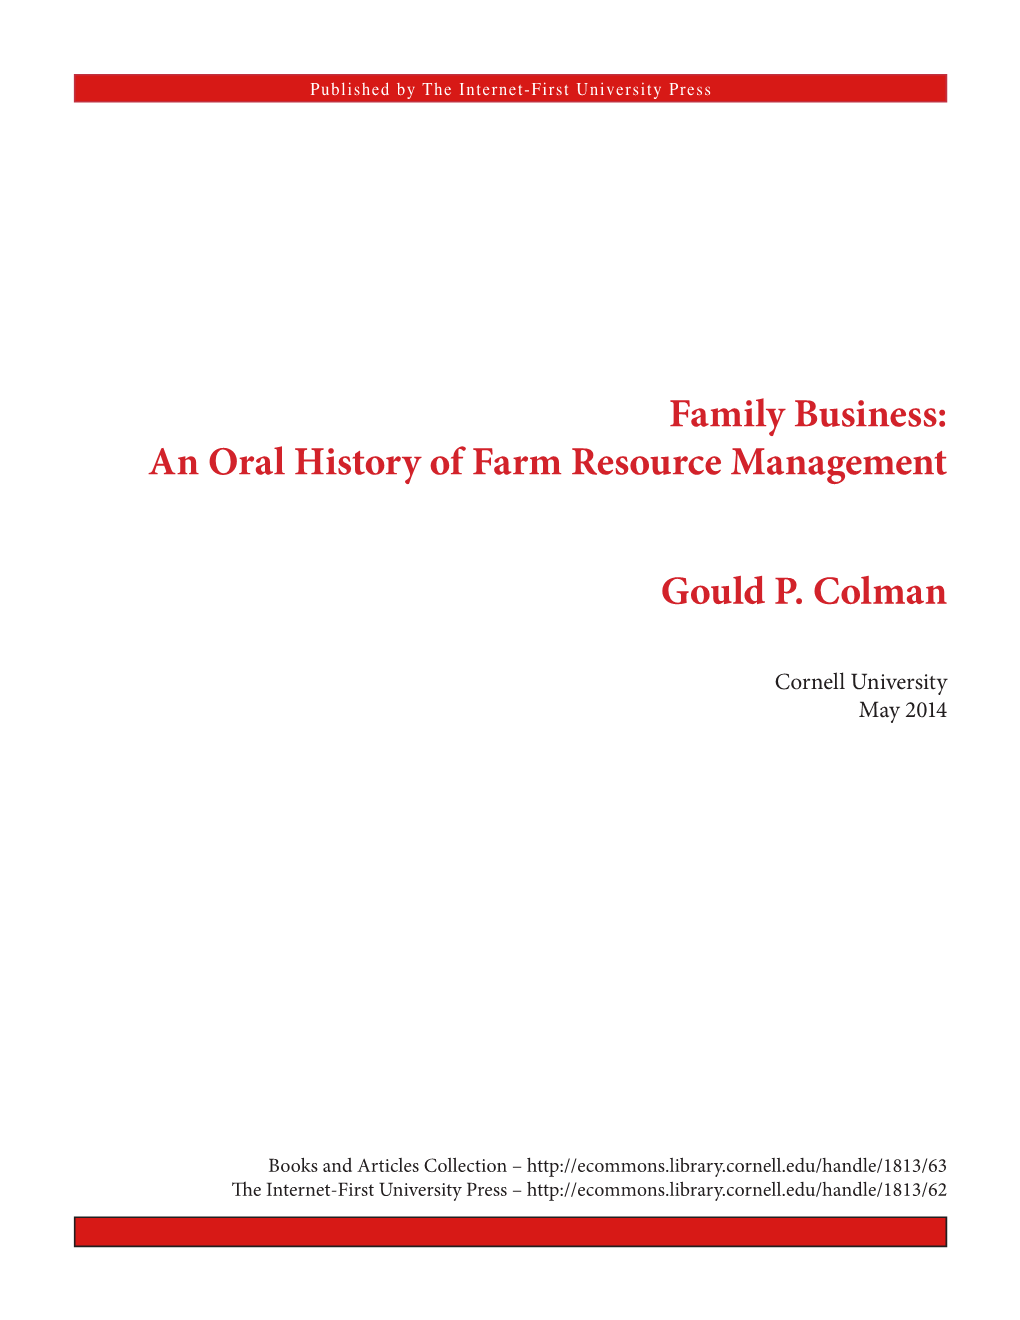 Family Business: an Oral History of Farm Resource Management